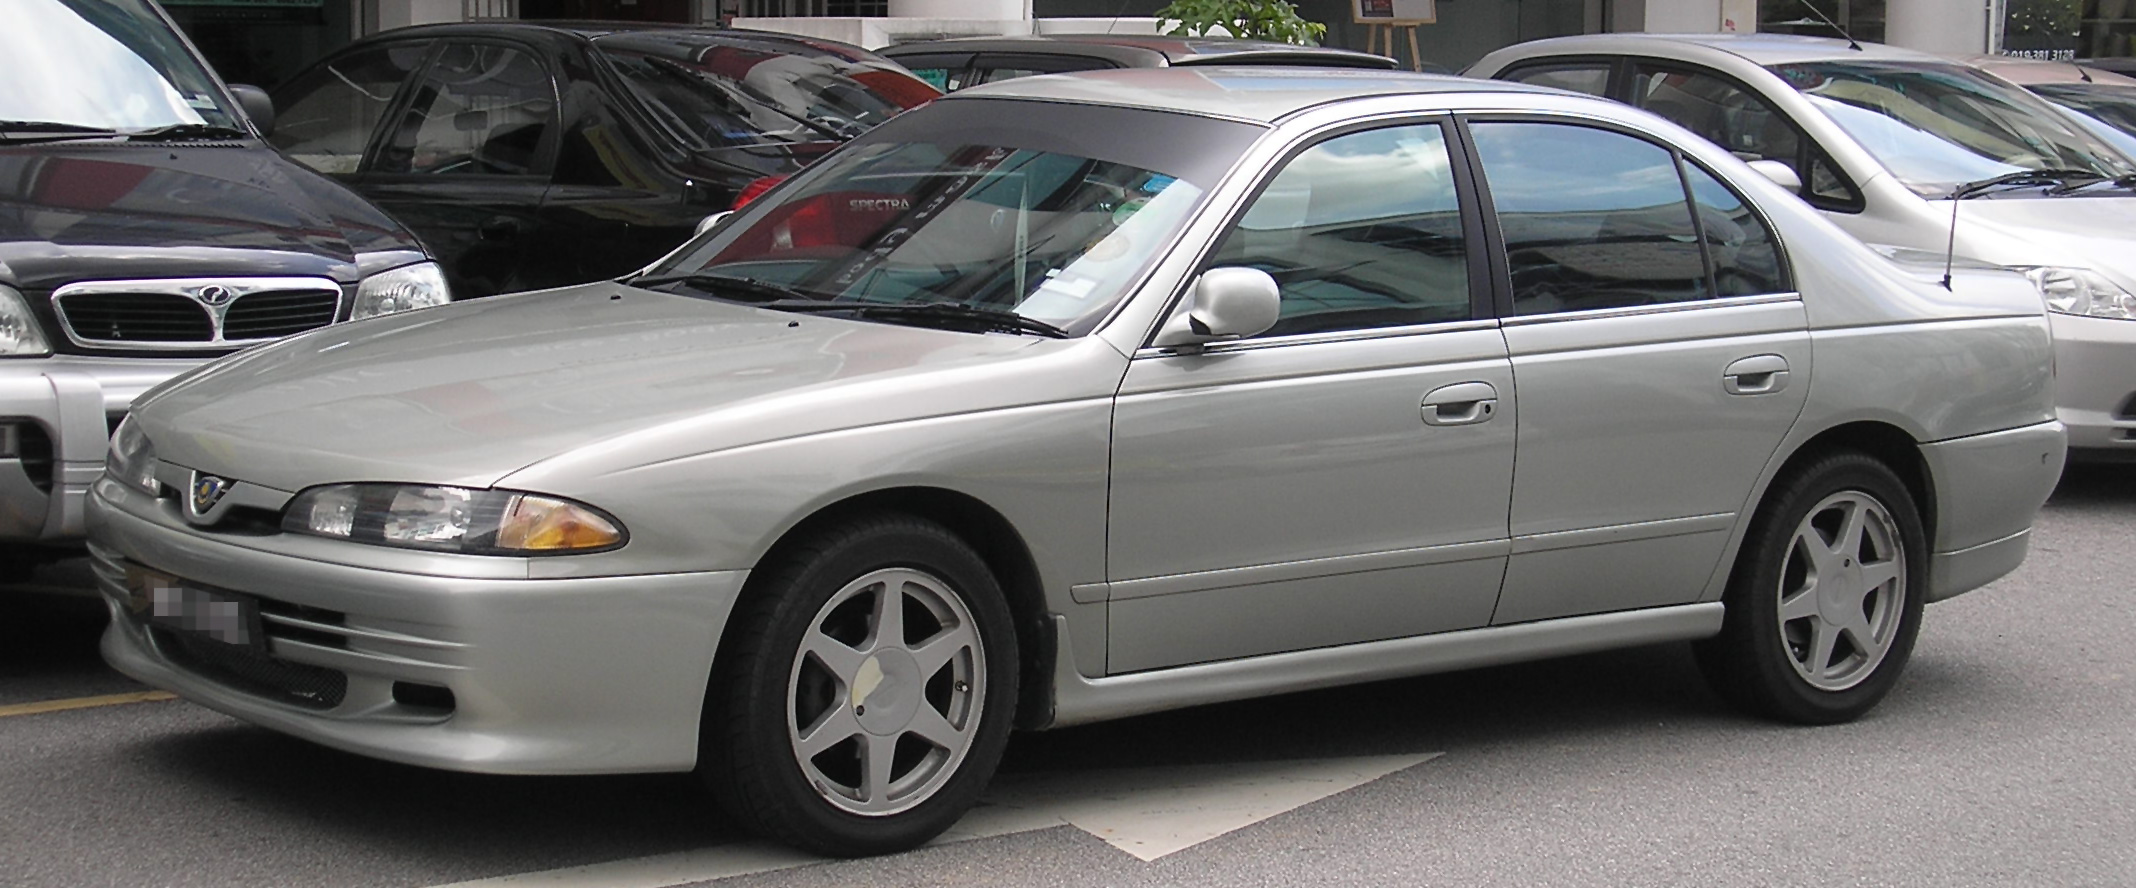 File:Proton Perdana (V6) (first generation, first facelift) (front ...